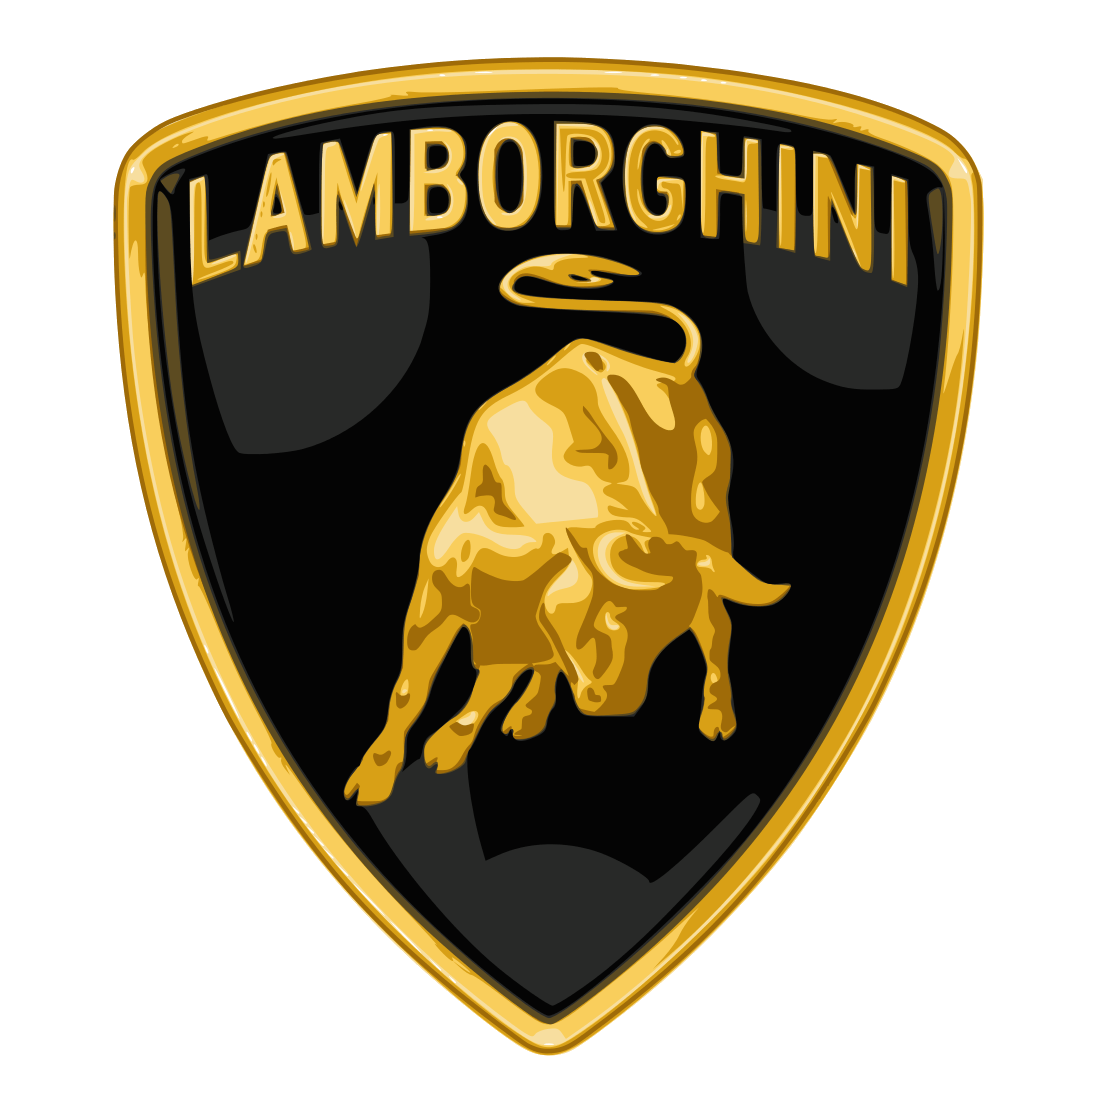 Lamorgini Logo - Lamborghini Logo, Lamborghini Car Symbol Meaning and History | Car ...